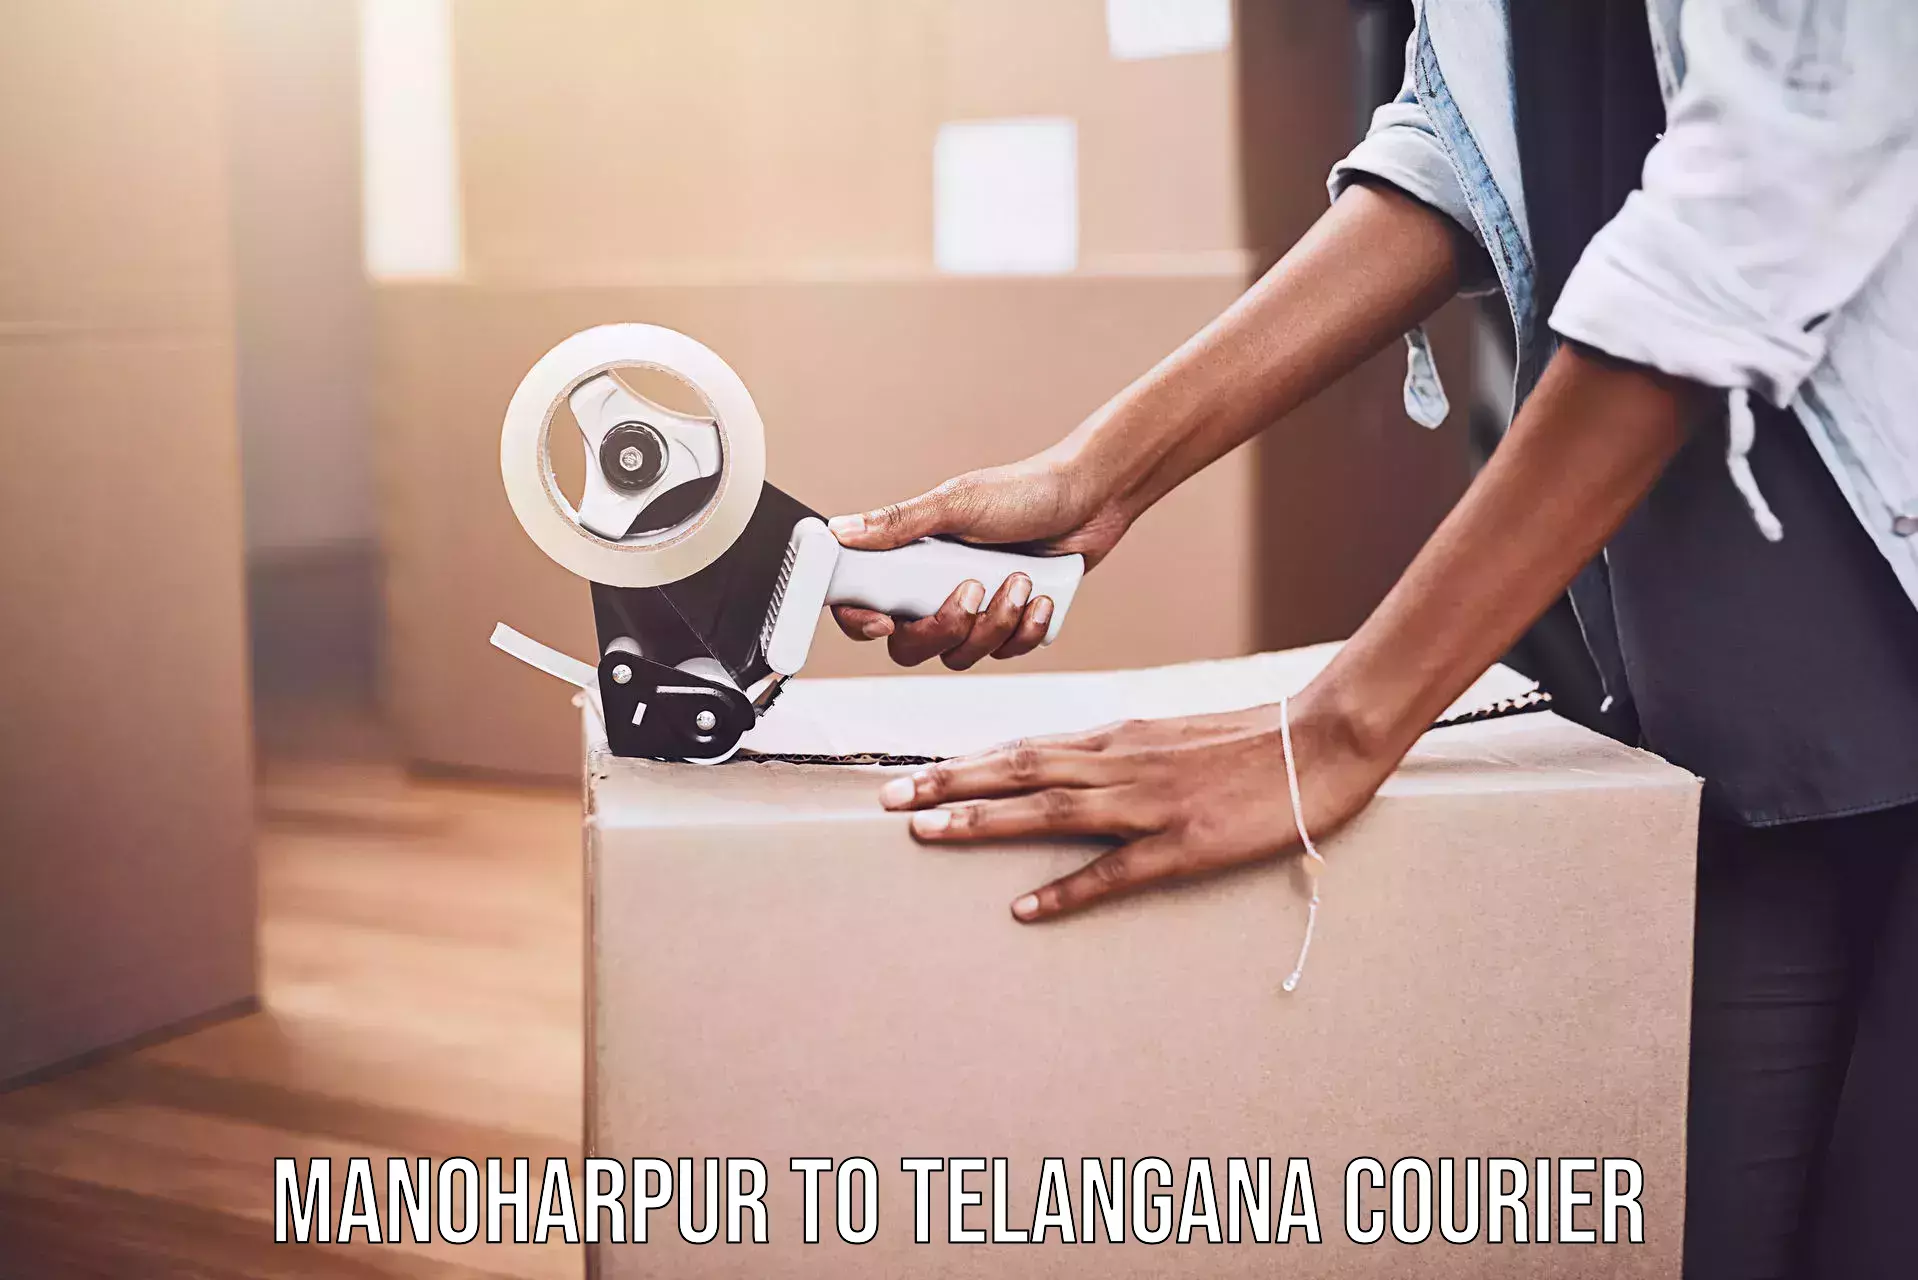 Budget-friendly shipping Manoharpur to Sultanabad